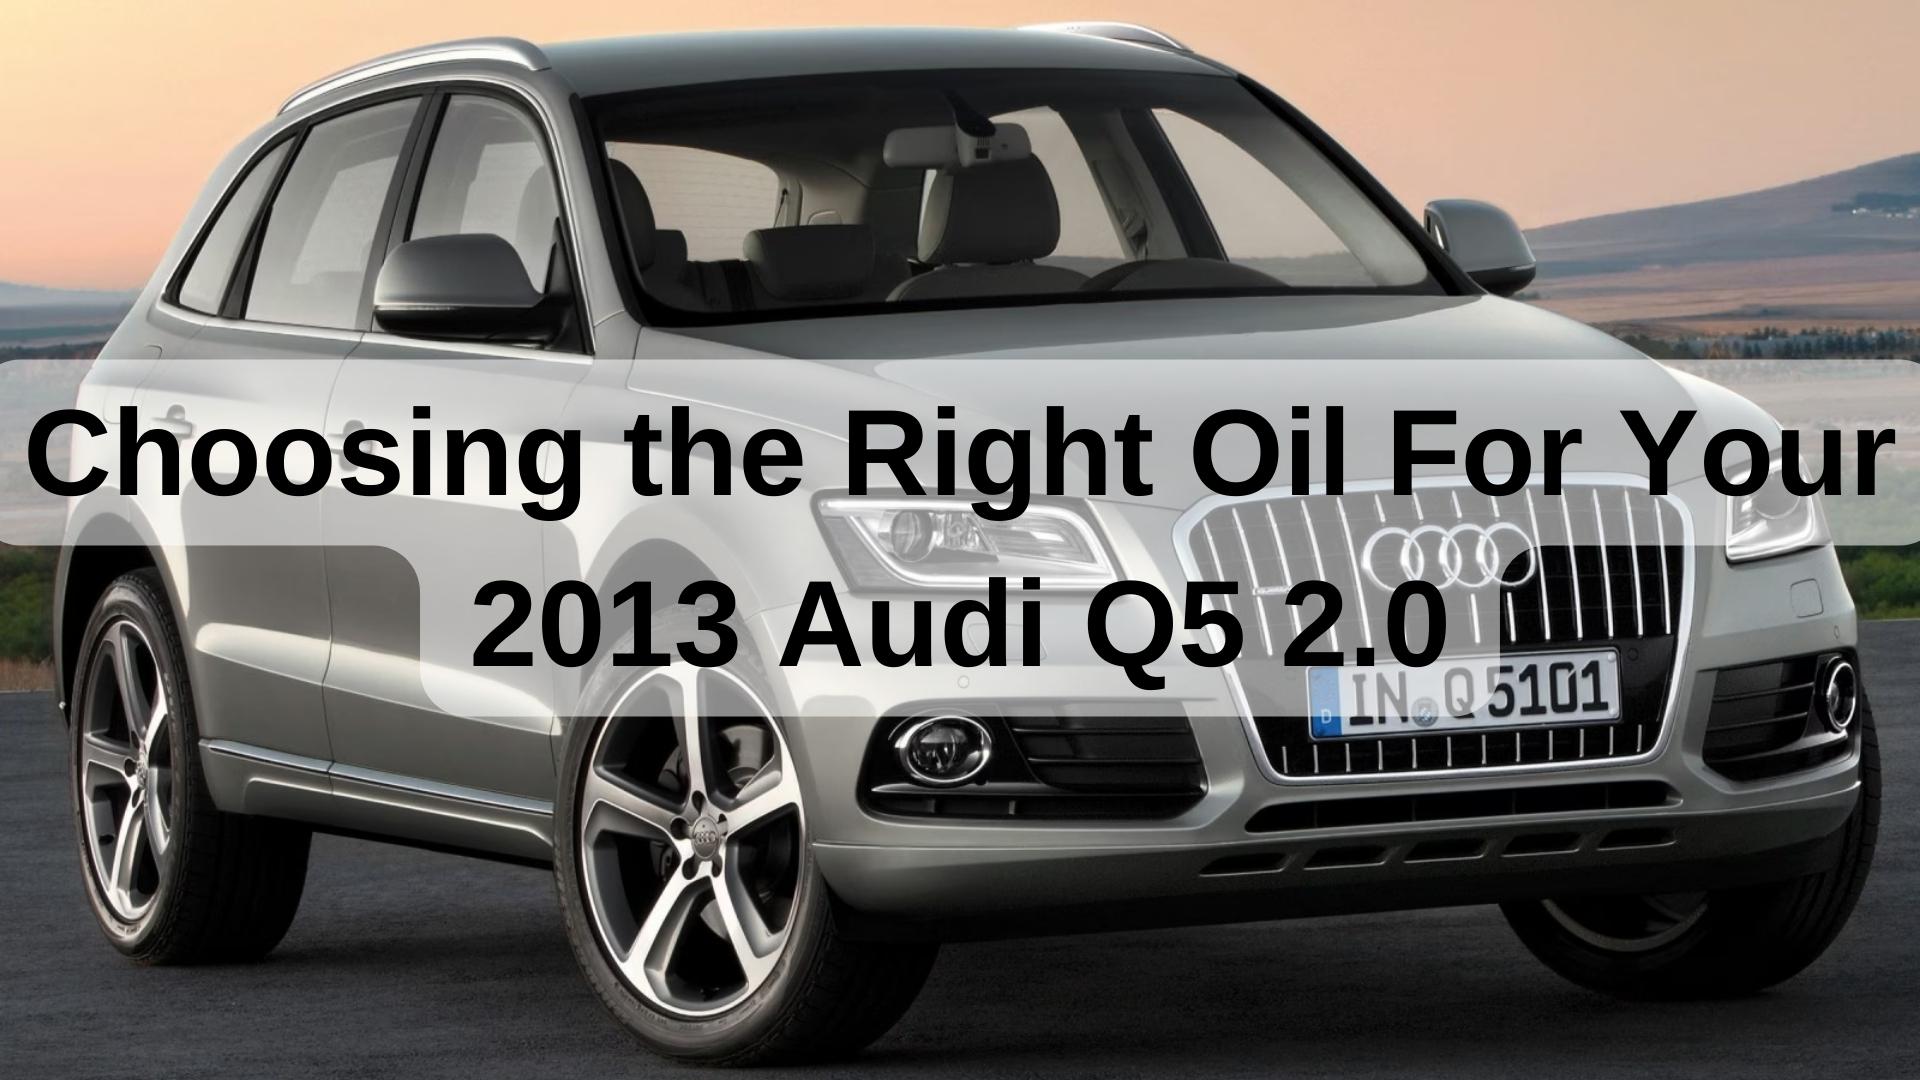 Choosing the Right Oil For Your 2013 Audi Q5 2.0